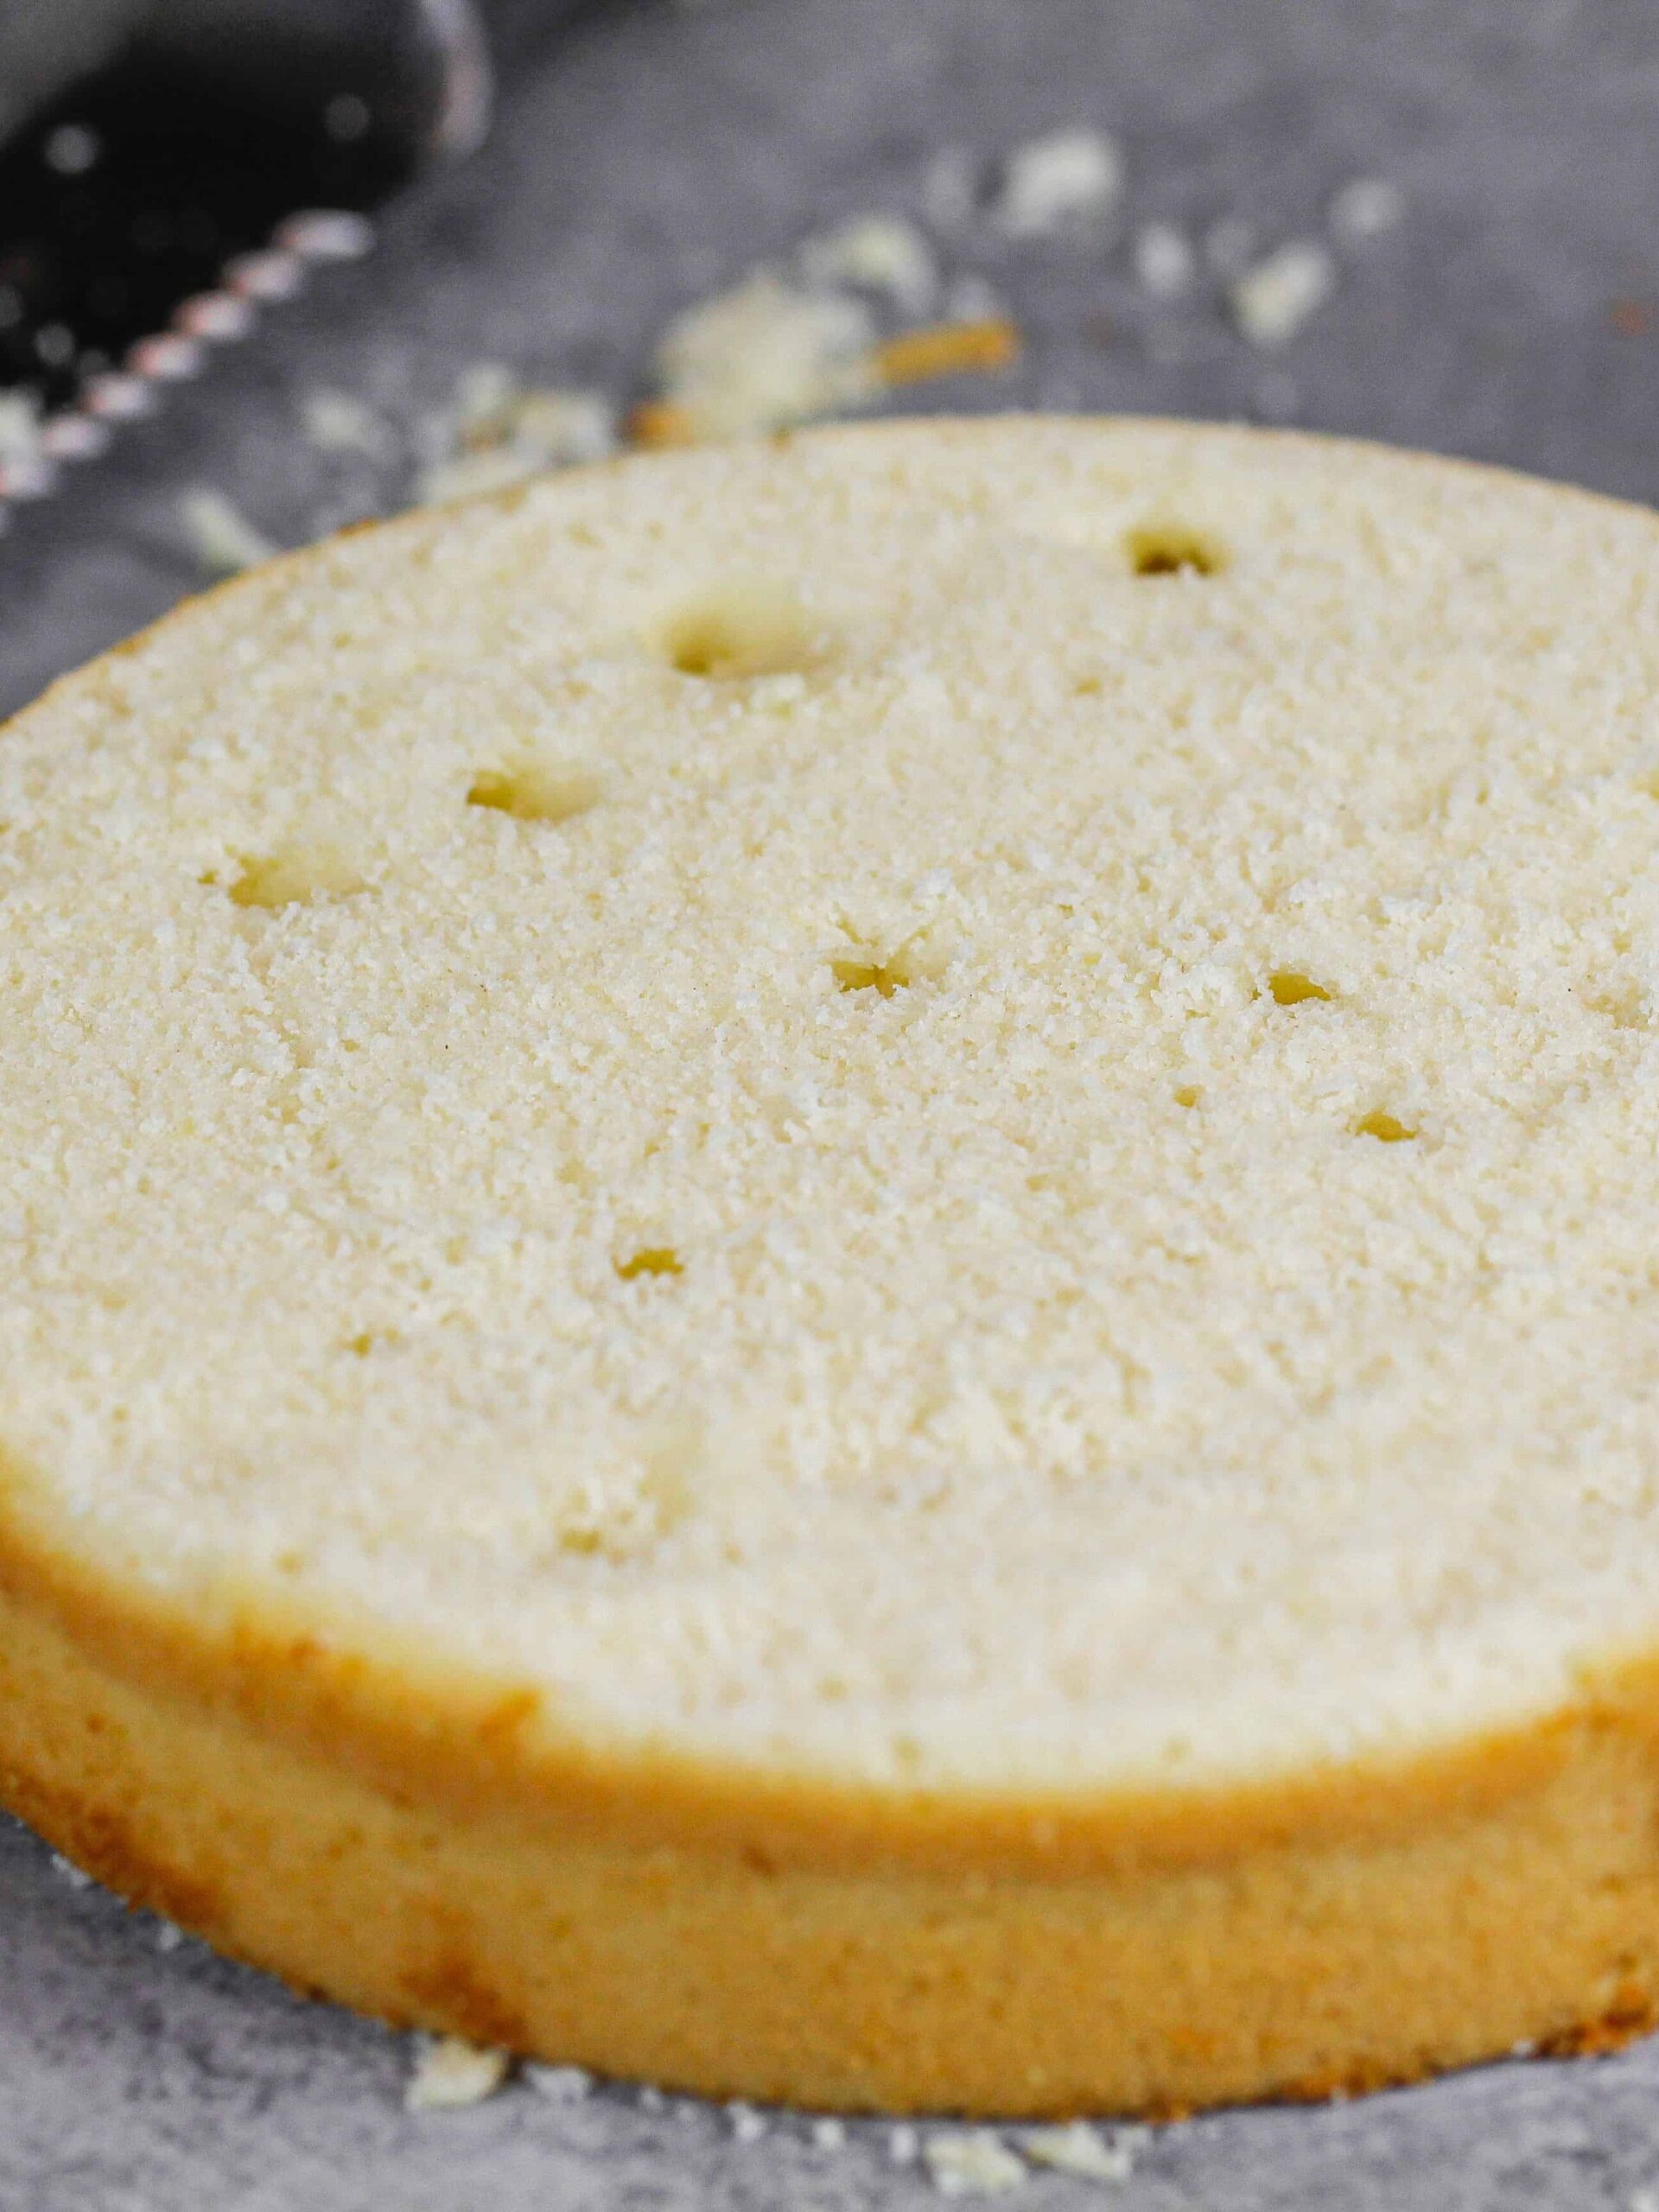 photo of a cake layer that was overmixed! This causes strong gluten strands to form which trap the leavening agent in the batter and cause it to create these air bubbles or tunnels.